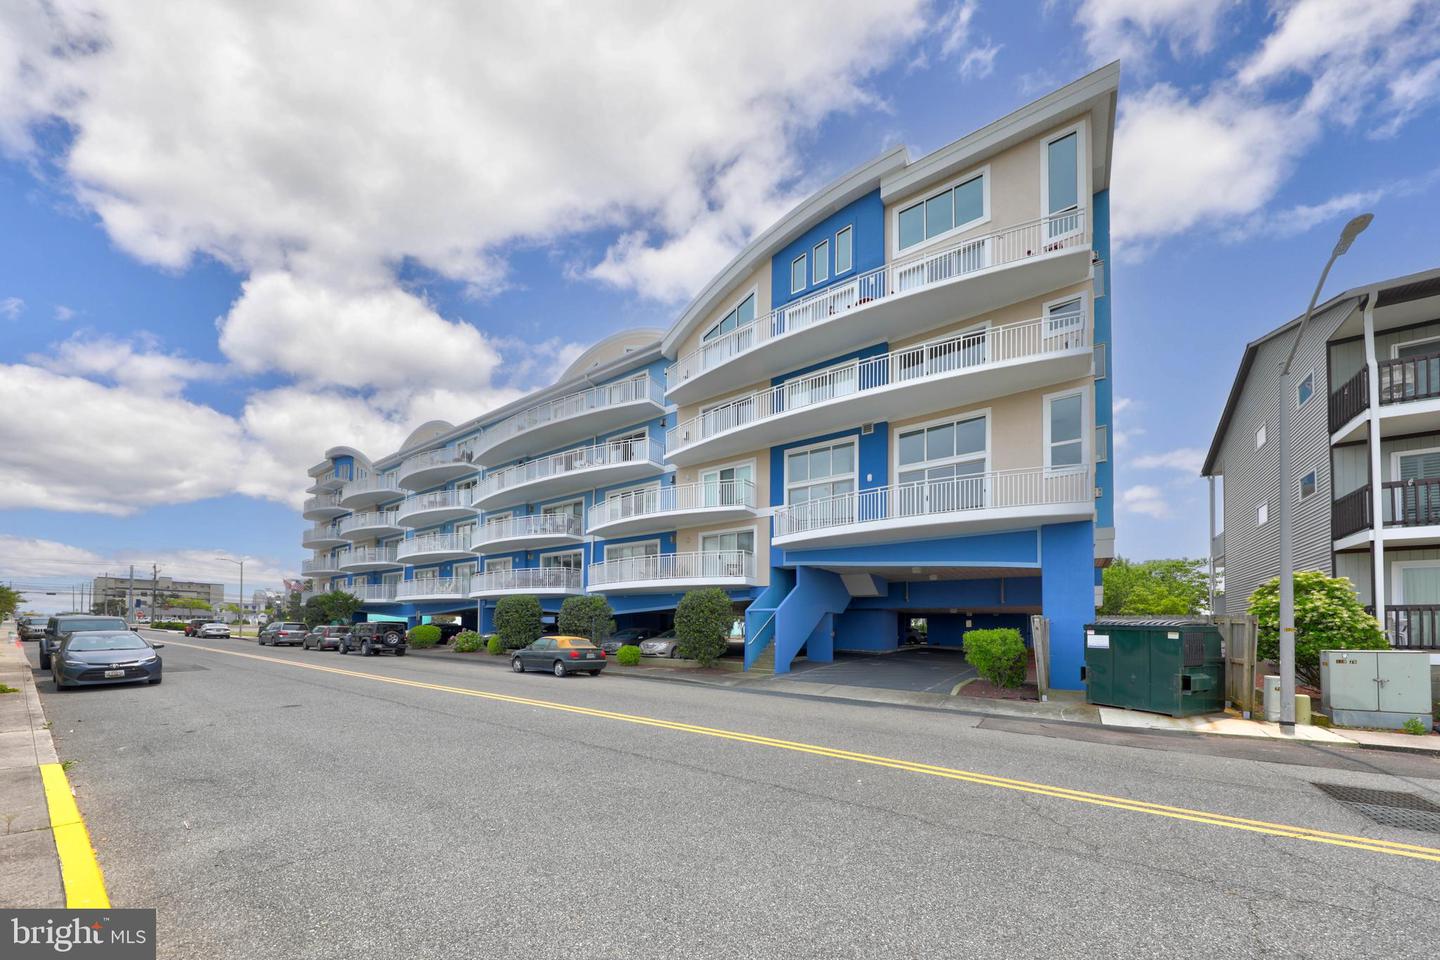 MDWO2014476-802397522978-2024-02-22-06-03-11 111 76th St #101 | Ocean City, MD Real Estate For Sale | MLS# Mdwo2014476  - 1st Choice Properties